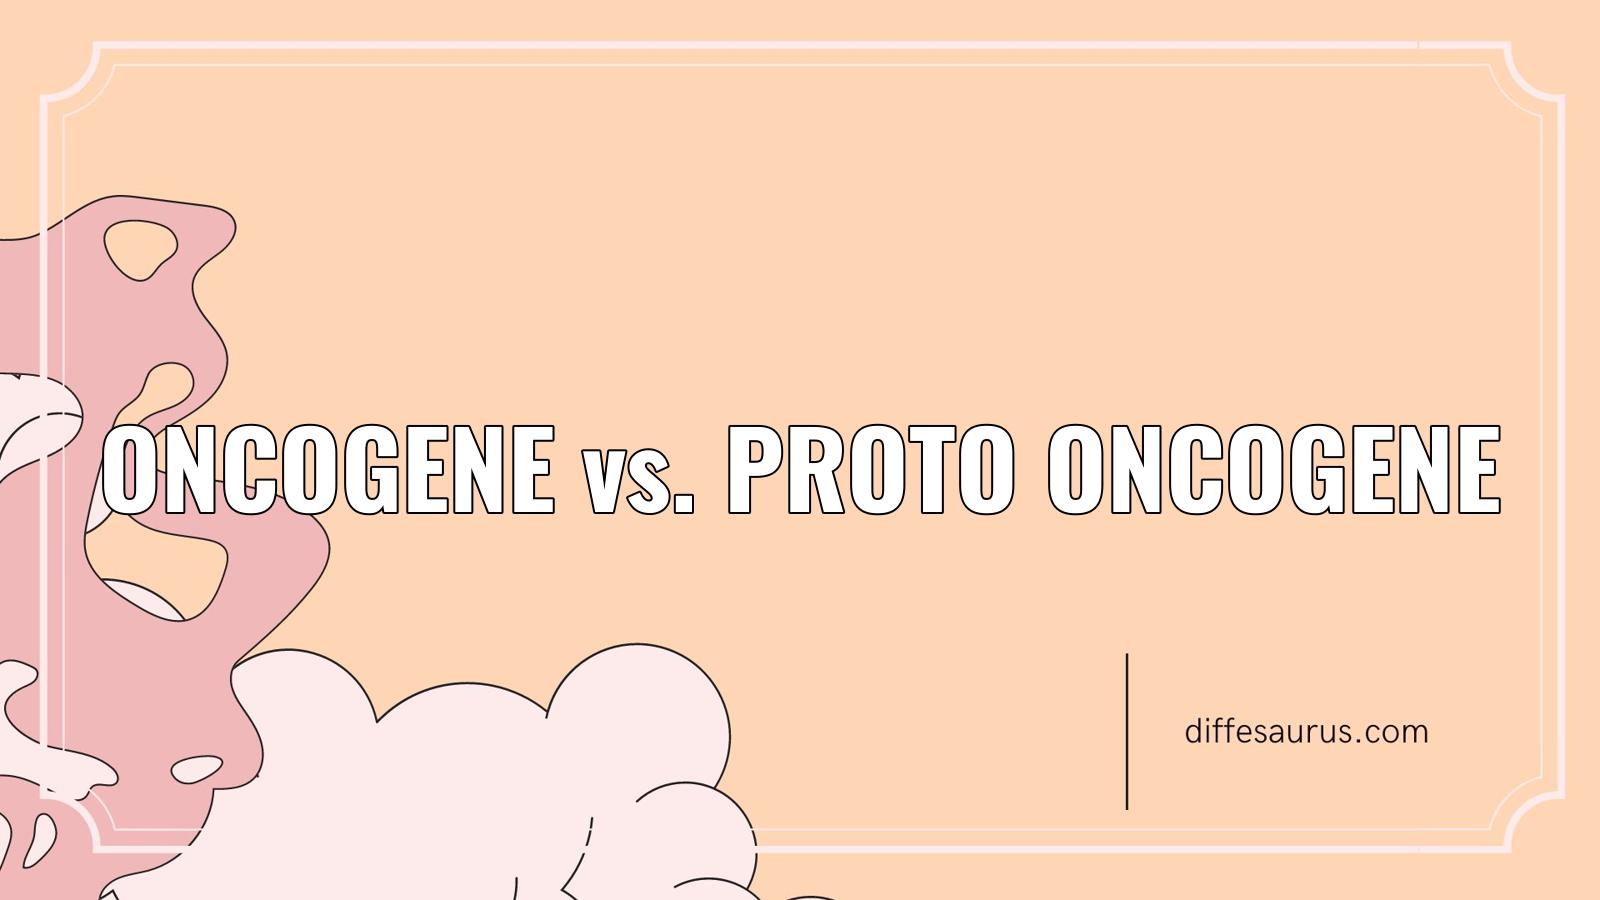 You are currently viewing Oncogene vs. Proto Oncogene: Differences Explained